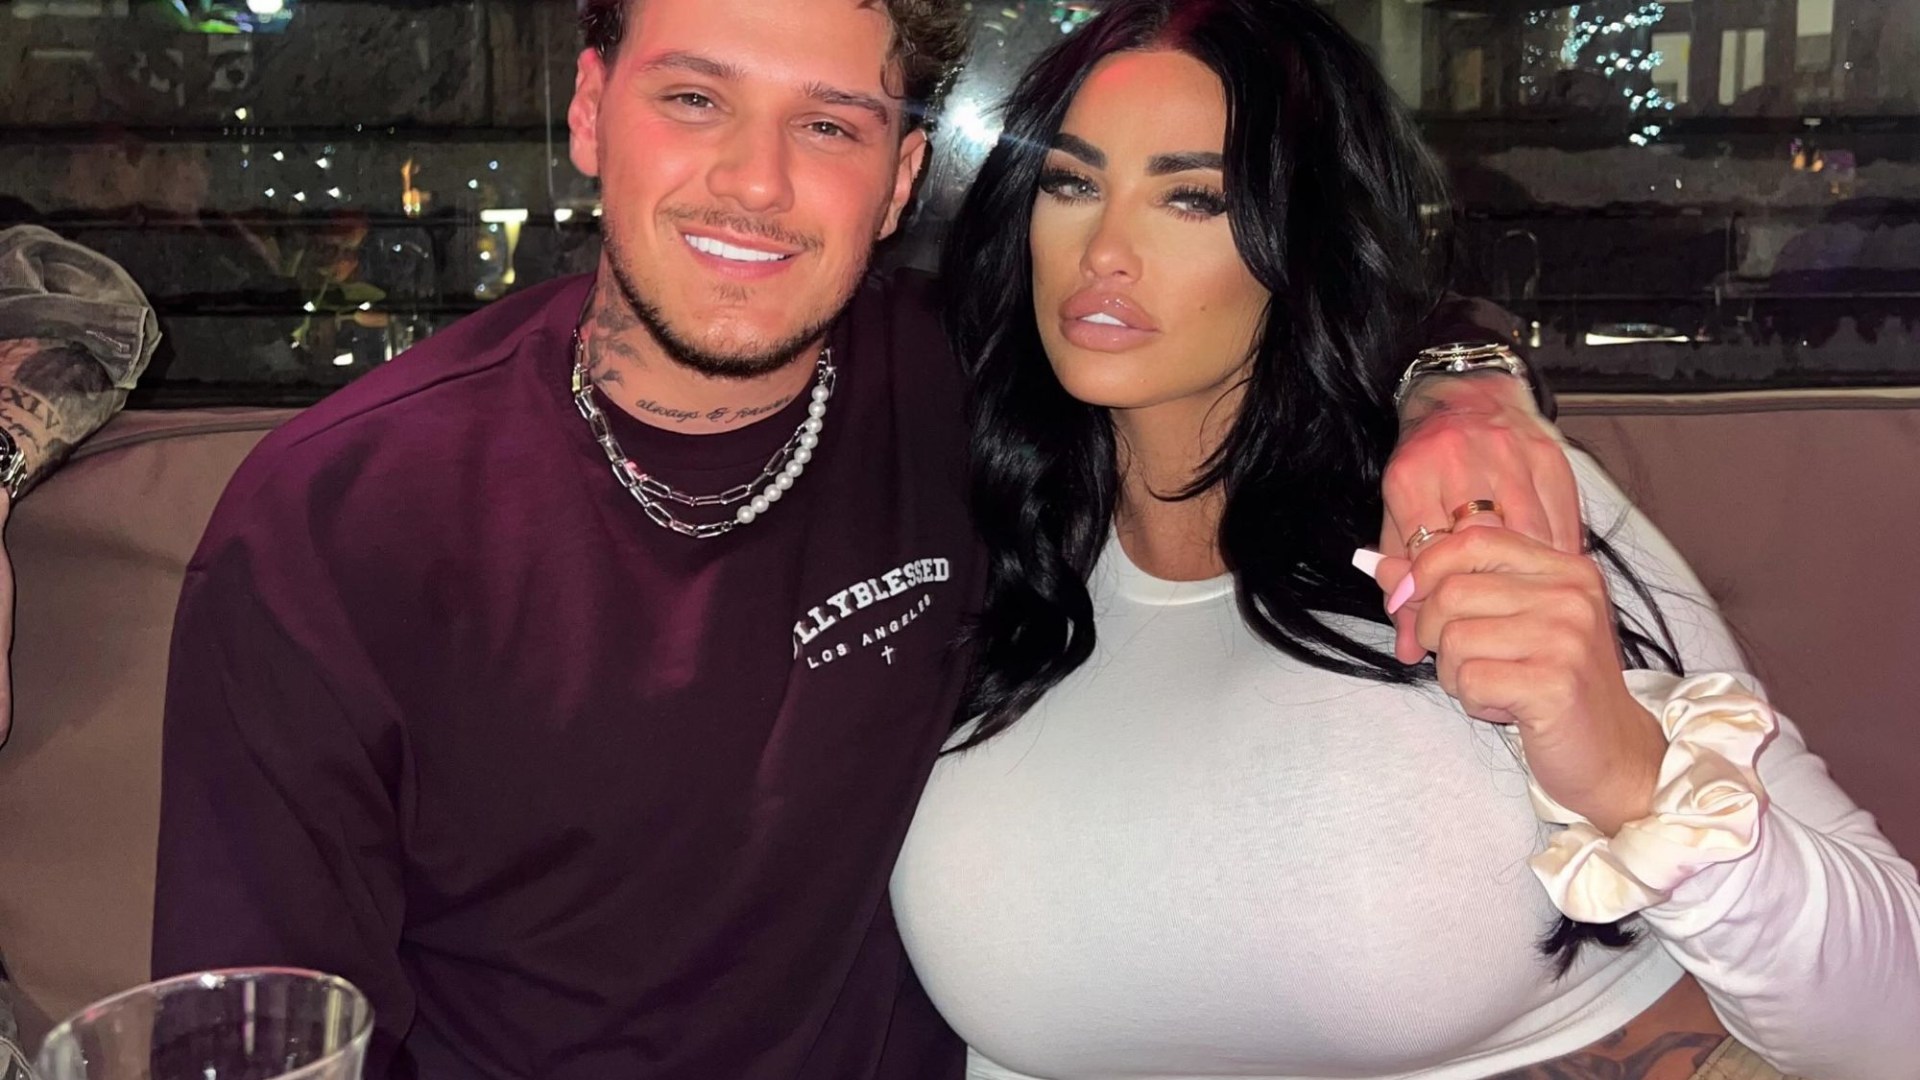 Katie Price and boyfriend JJ Slater show off new tattoo tributes - revealing their pet names for each other [Video]